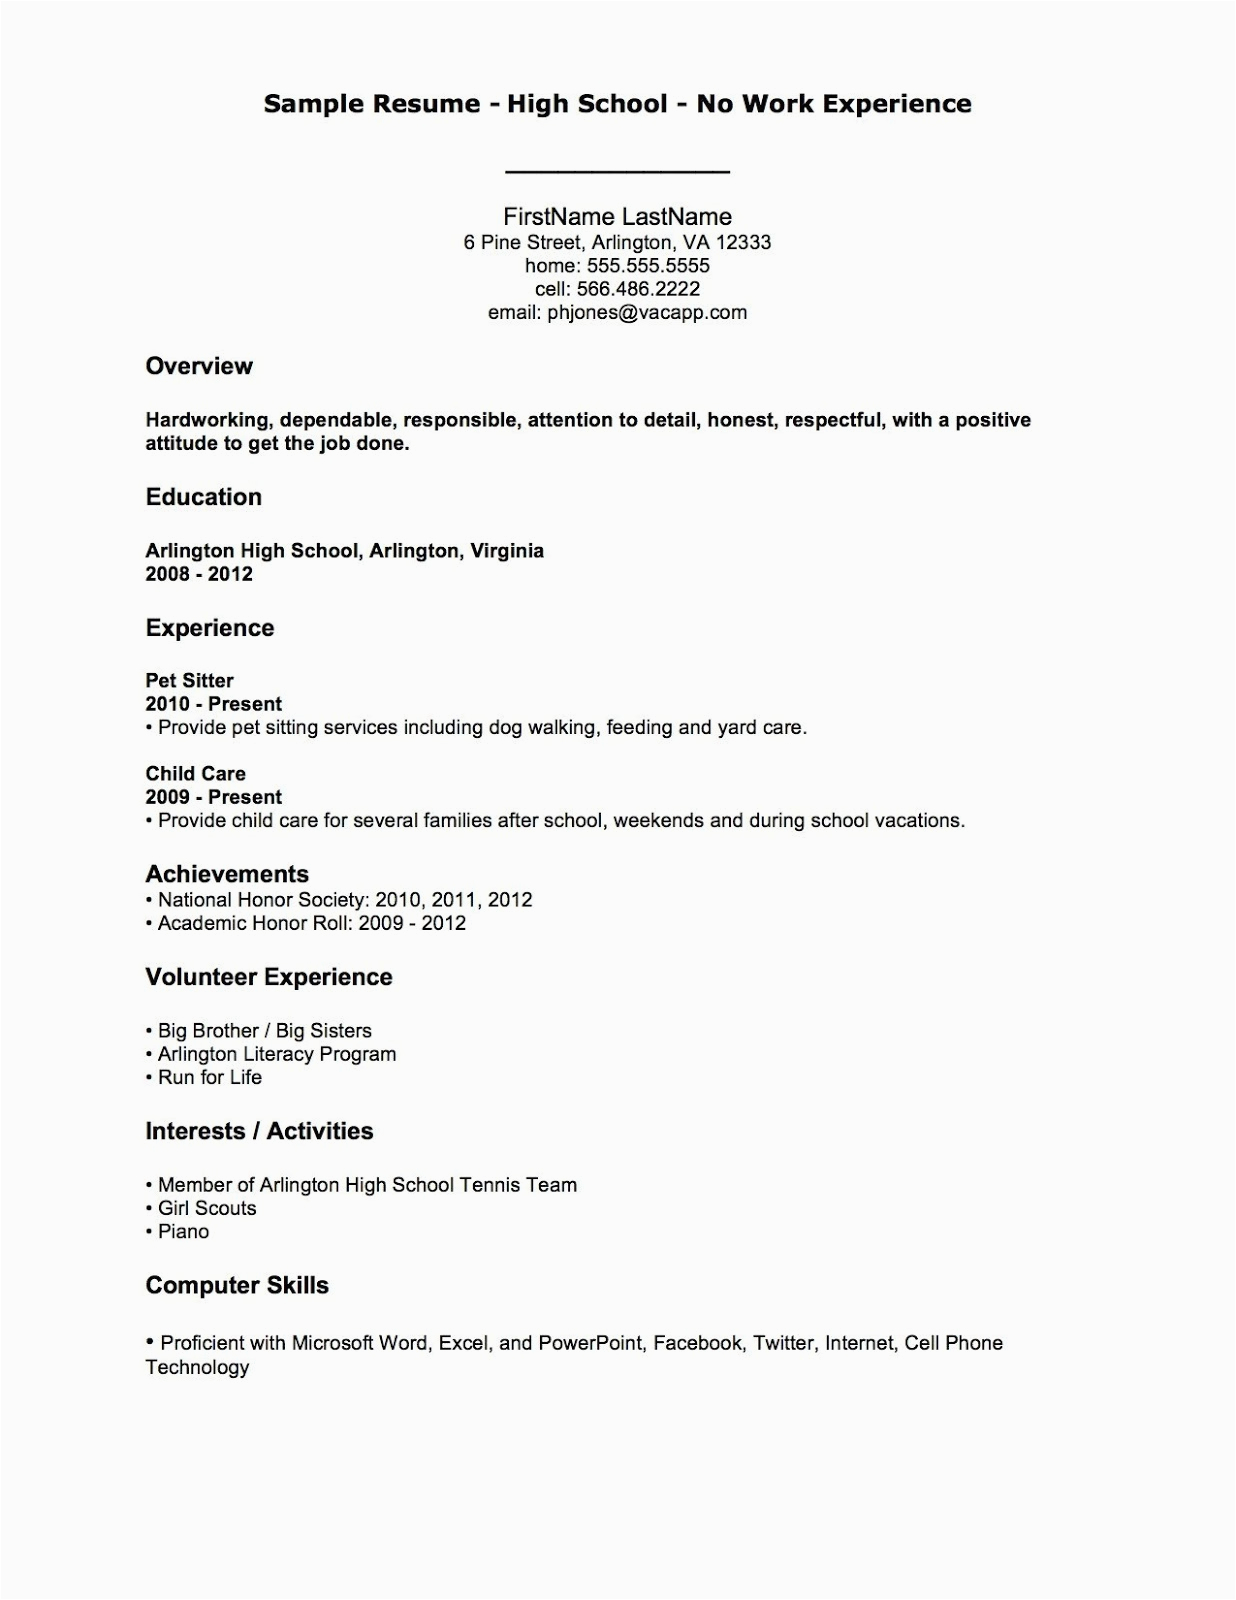 Basic Resume Template for First Job First Job Sample Resume